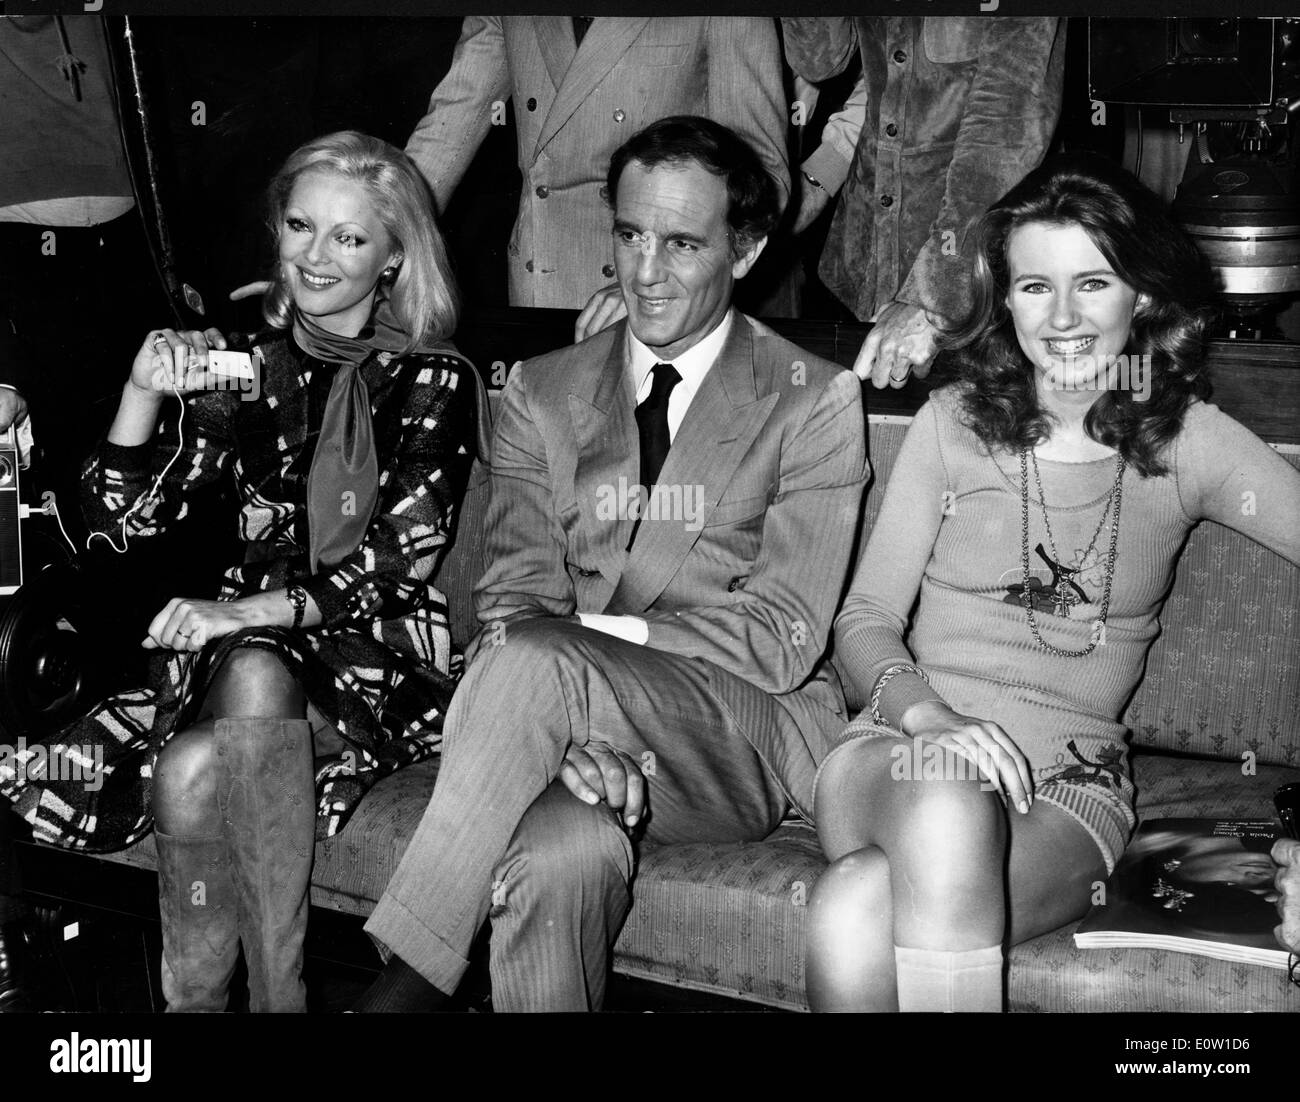 Actress Virna Lisi sitting with friends at a party Stock Photo